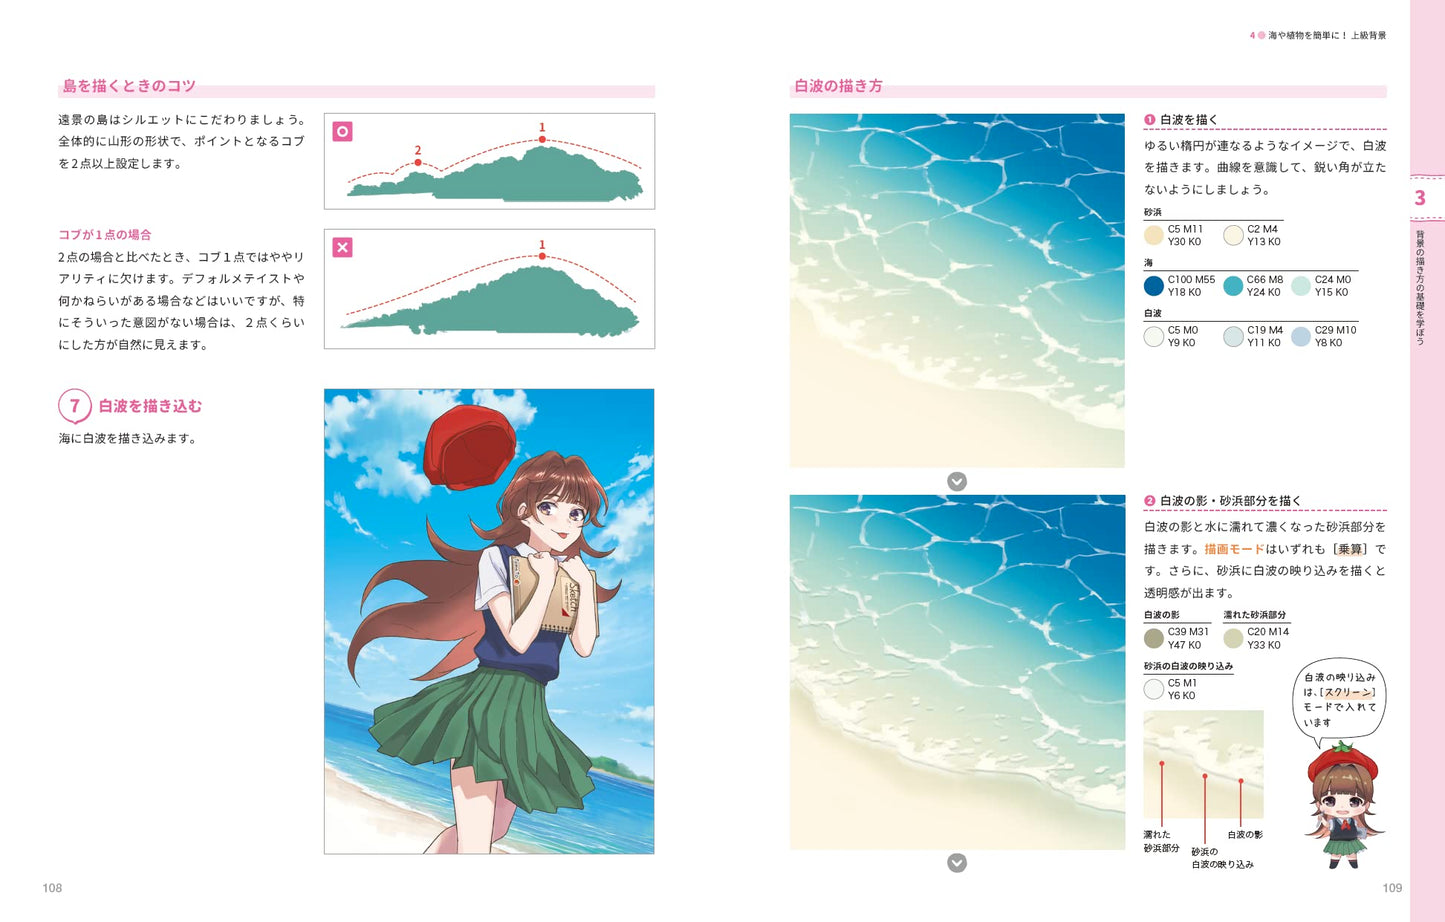 Enjoy Learning with tomato-sensei How To Draw Backgrounds